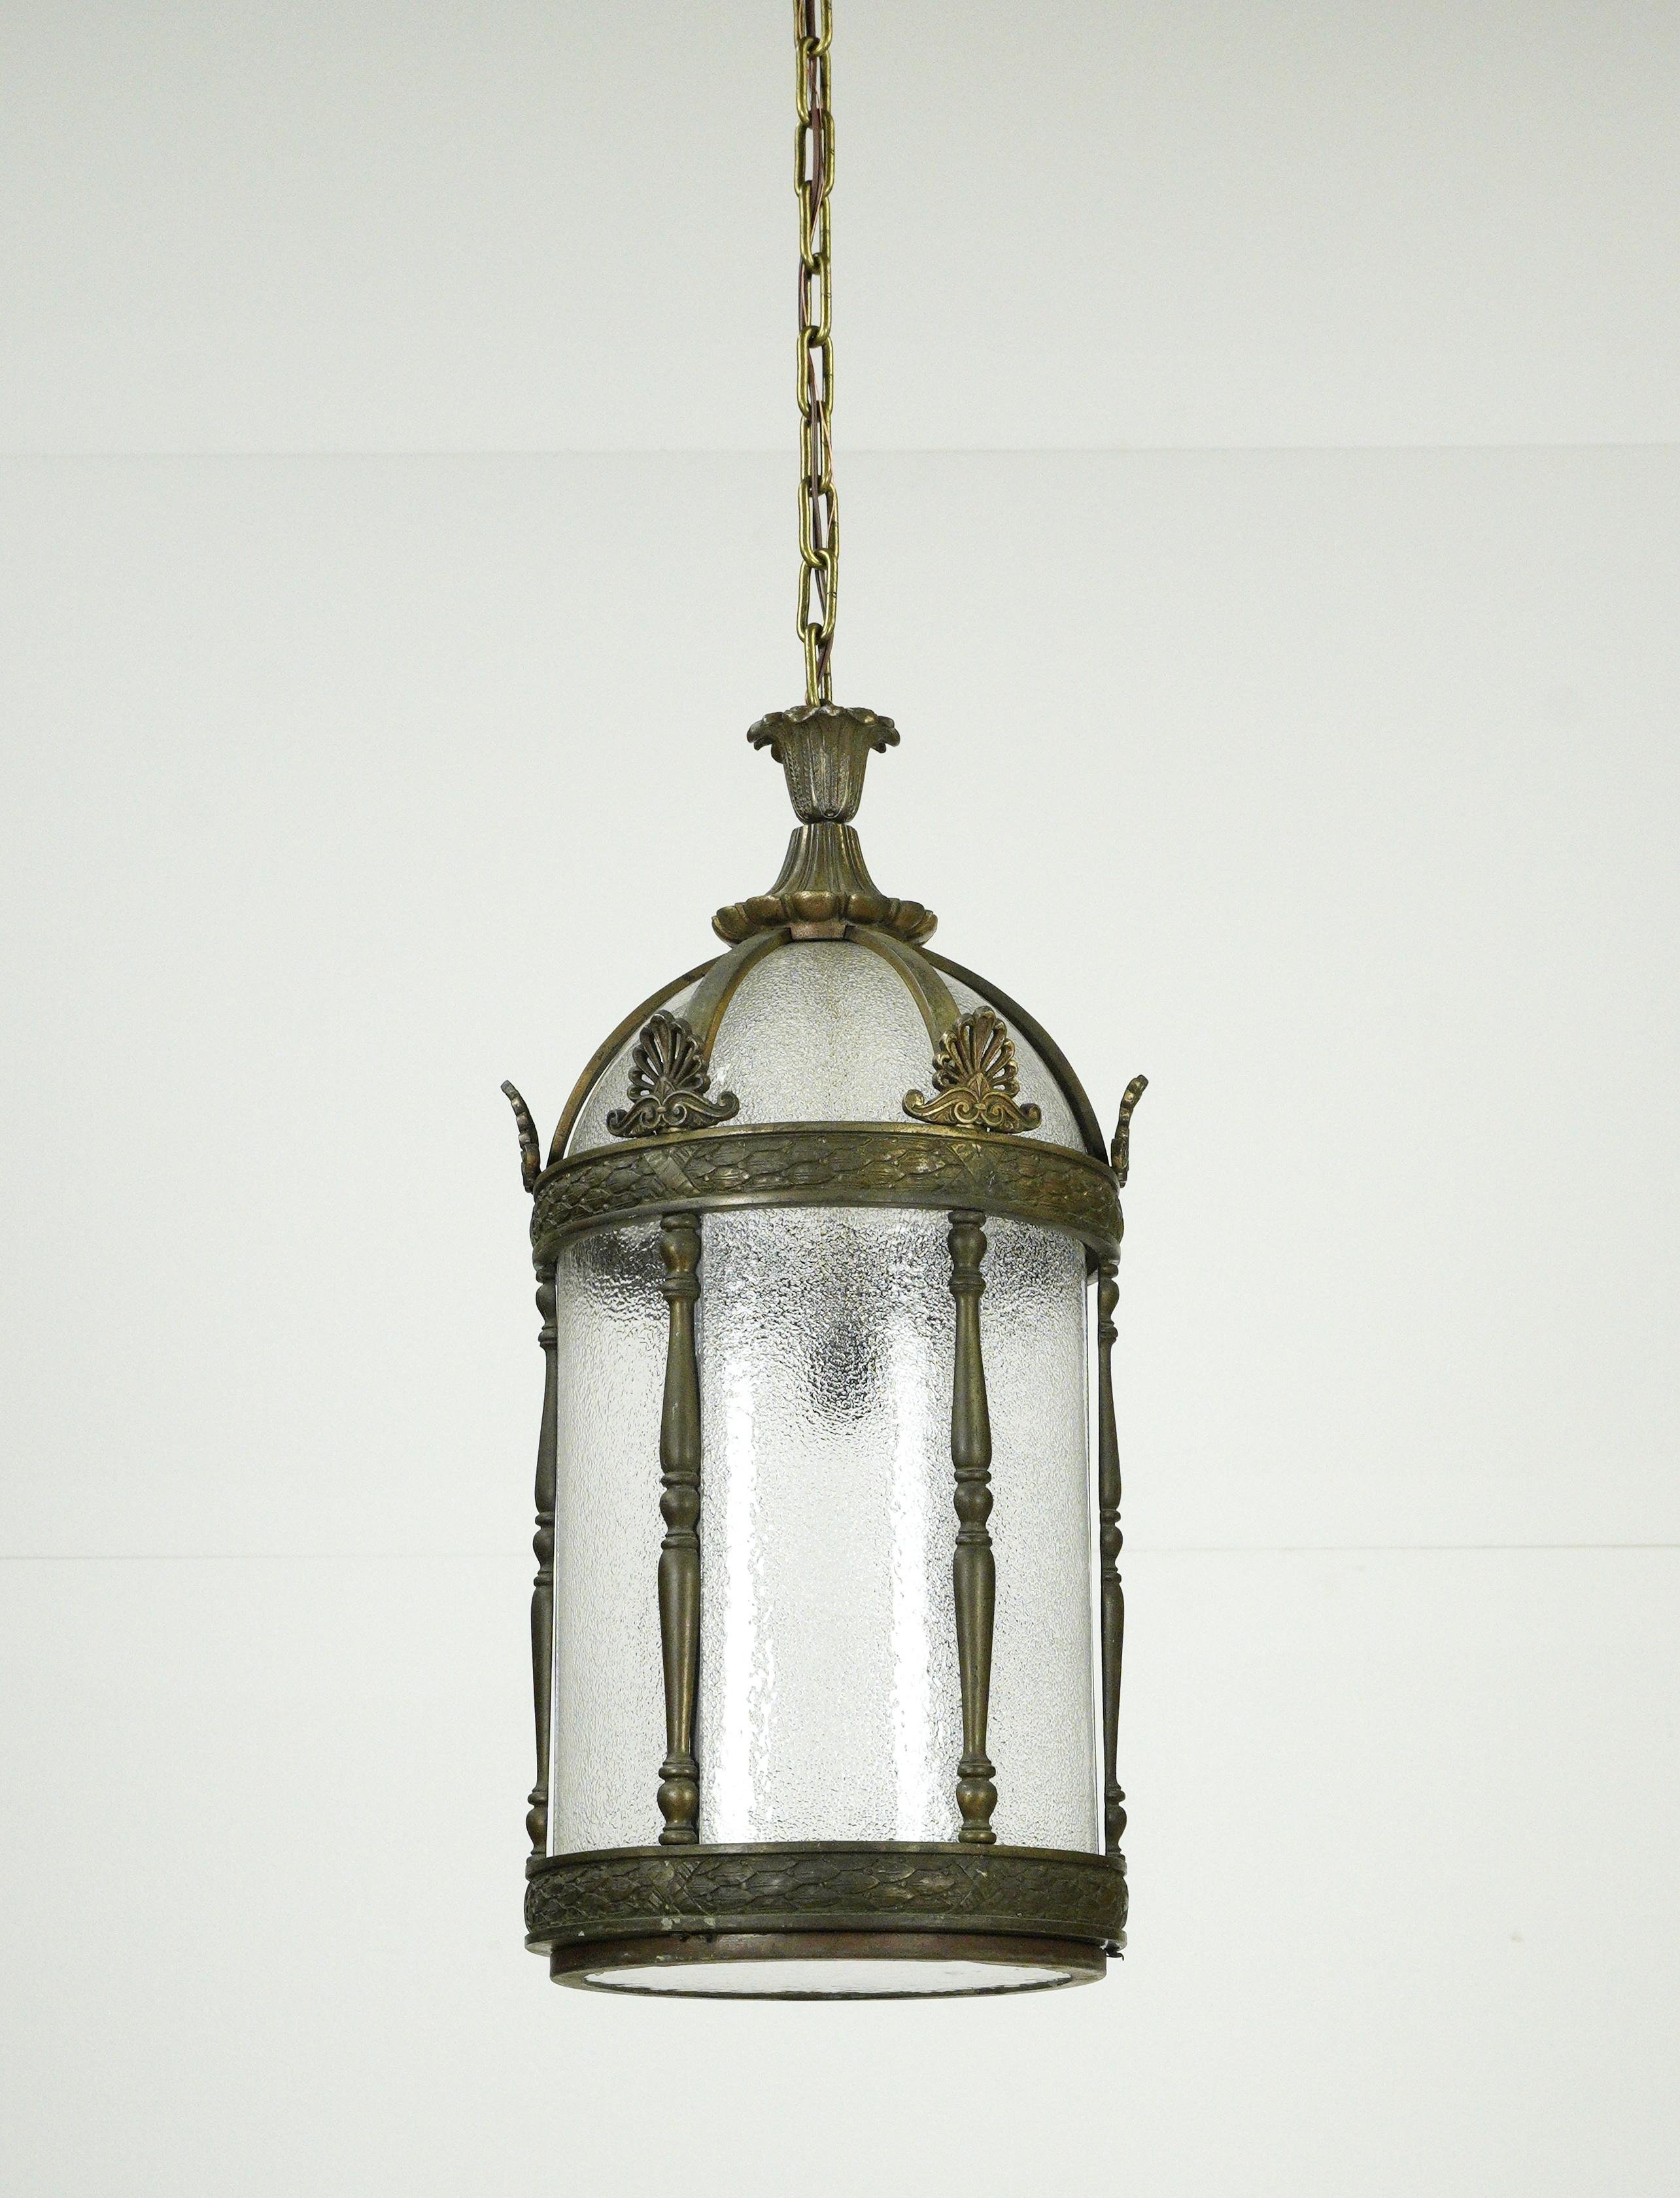 Large solid bronze framed pendant lantern with clear textured glass and a steel chain. Cleaned and restored. This light requires one single standard light bulb. Indoor use only. Good condition with appropriate wear from age. This light is wired and